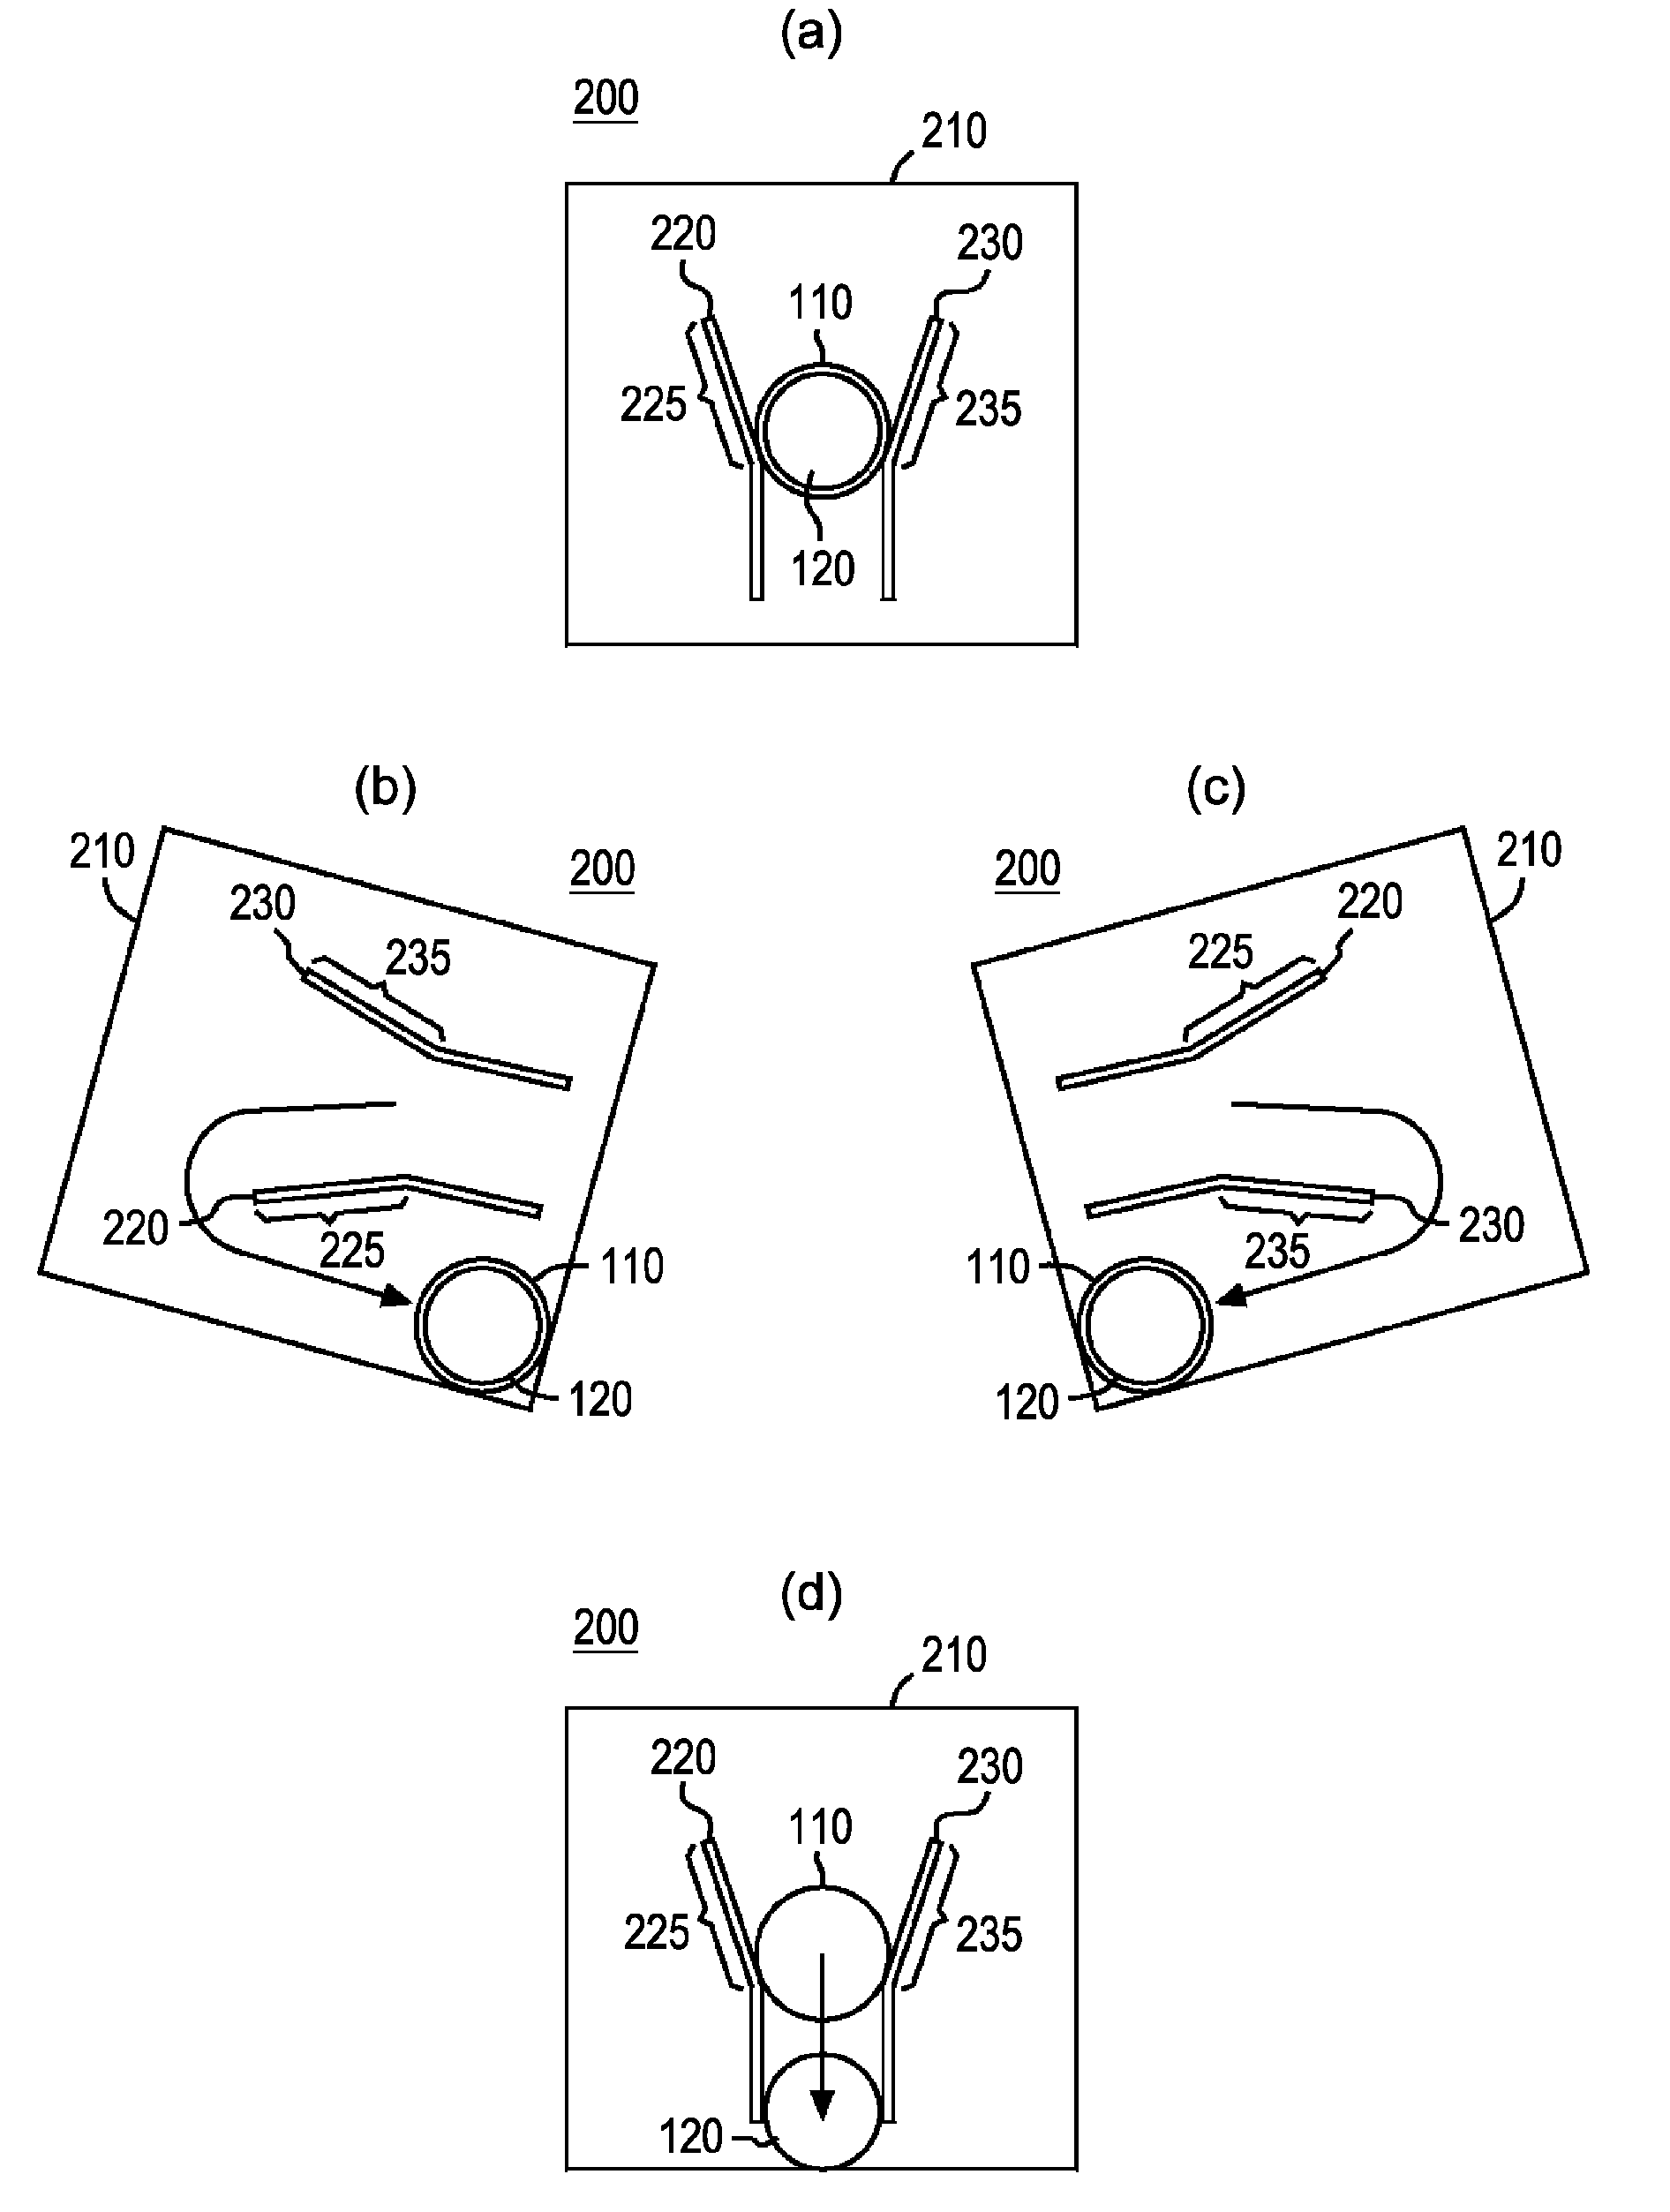 Indicator, detector, and detection method